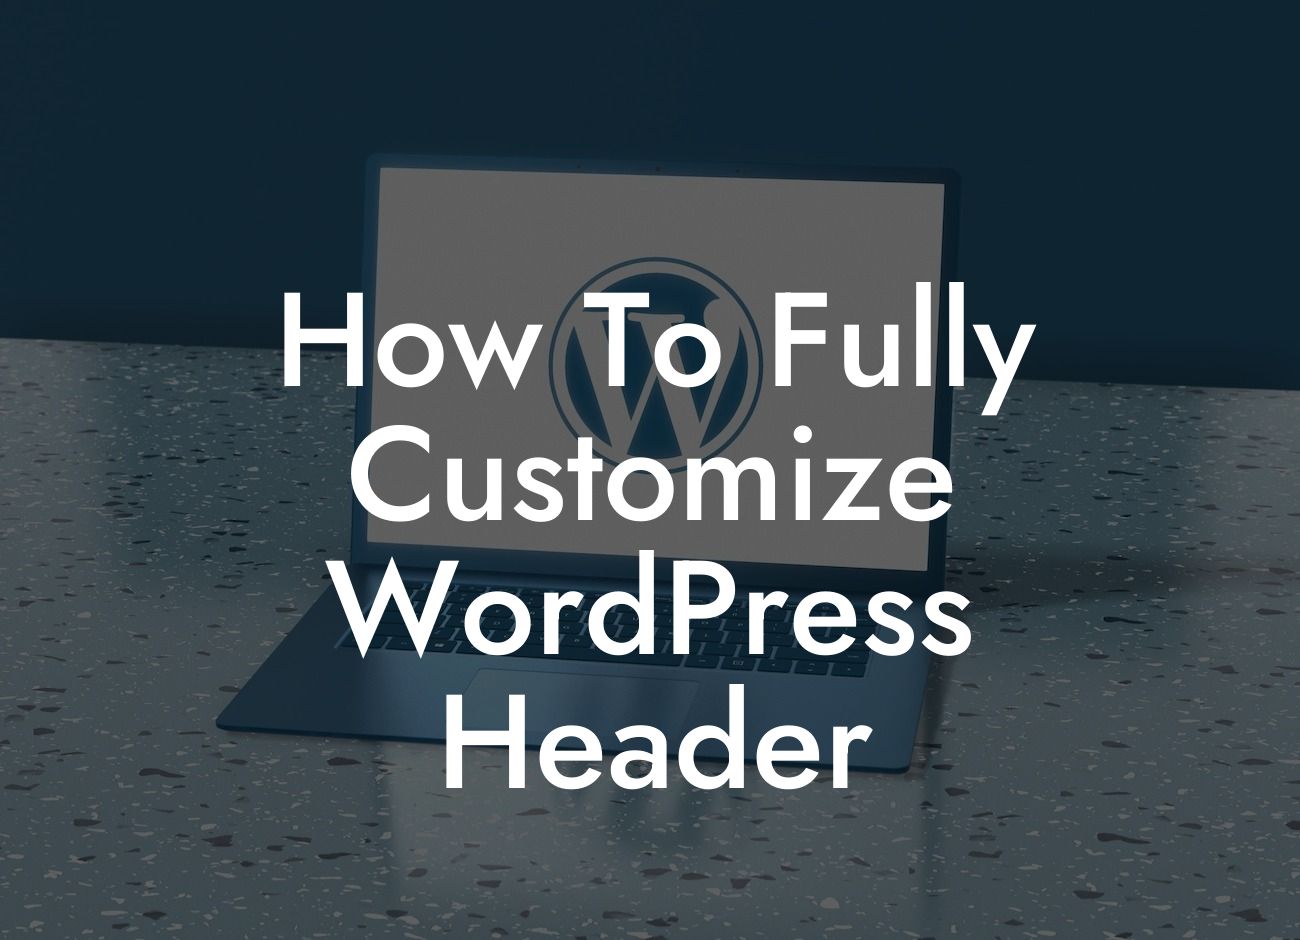 How To Fully Customize WordPress Header